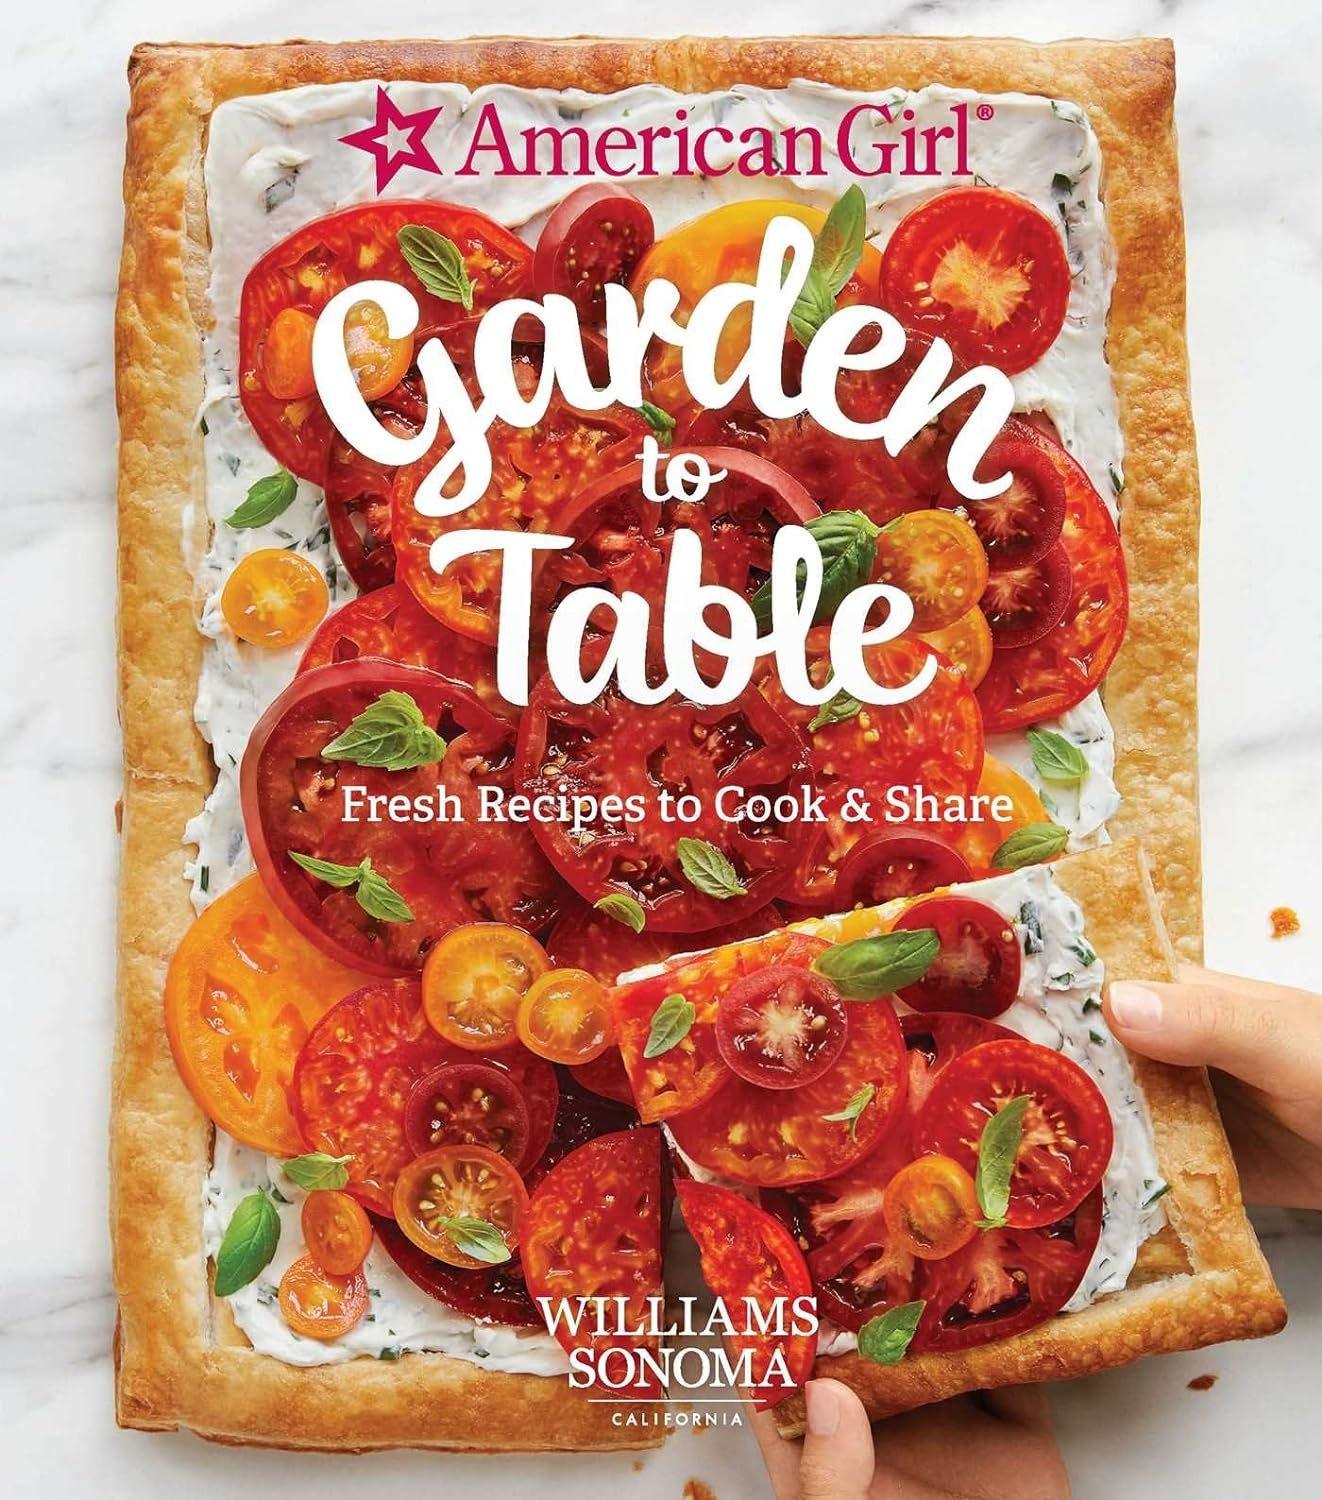 Cover of "American Girl: Garden to Table: Fresh Recipes to Cook & Share" cookbook by Williams Sonoma Test Kitchen, featuring a colorful tomato tart held by hands against a white background, ideal for teaching kids kid-friendly recipes and cooking skills